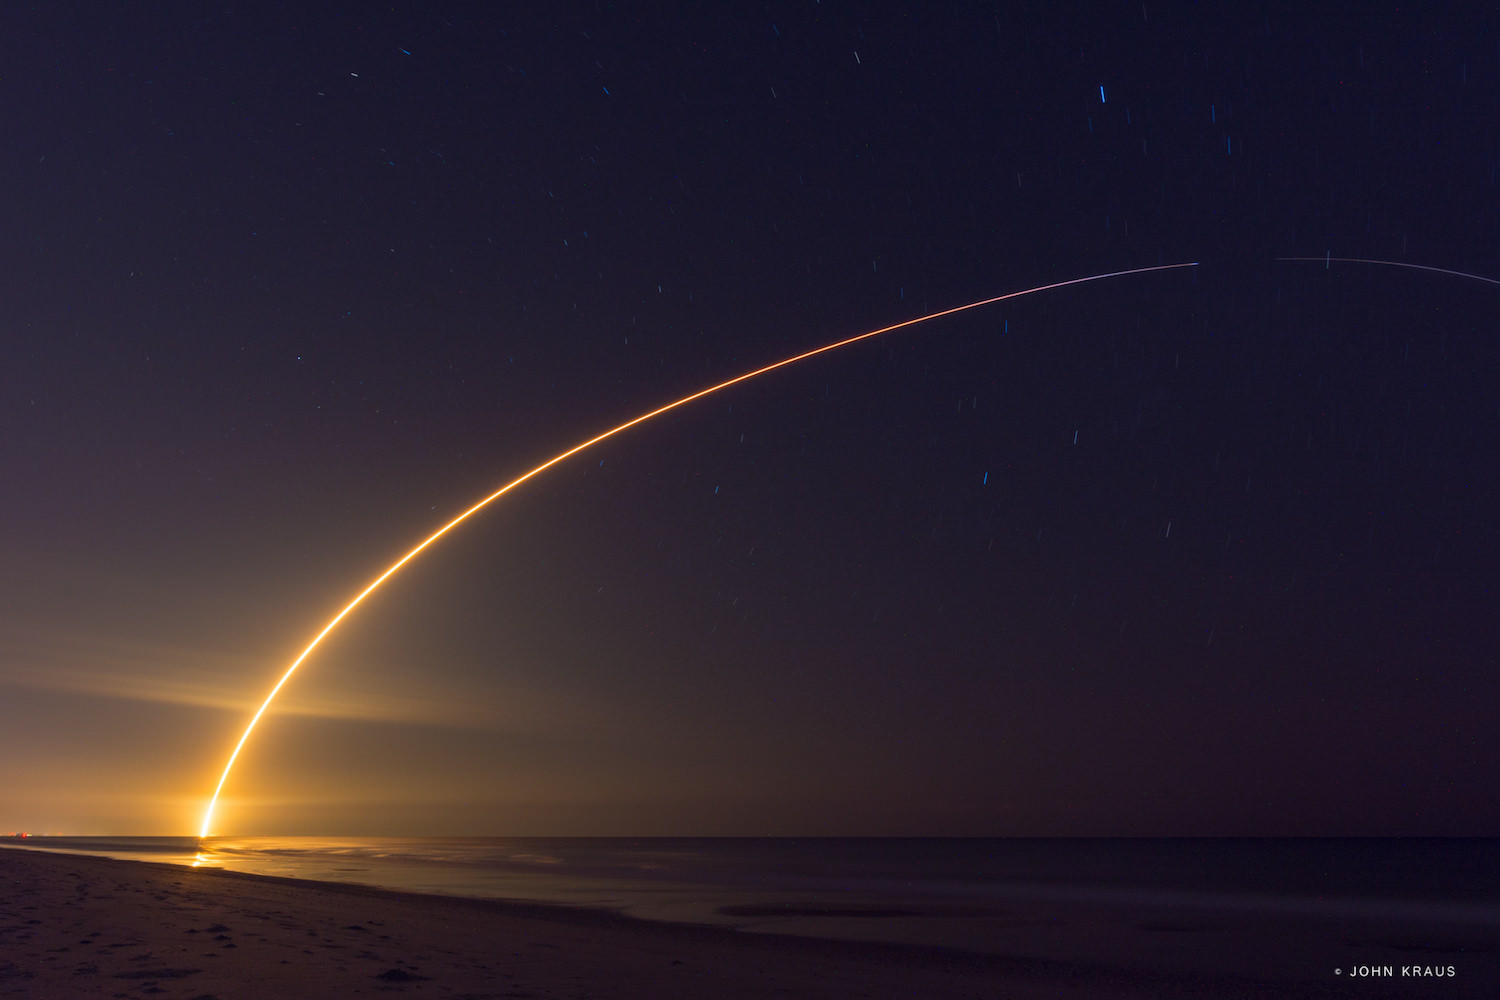 Streak shot of SpaceX Falcon 9 launching JCSAT-14 from 1st fully successful droneship landing on May 6, 2016 from Space Launch Complex 40 at Cape Canaveral Air Force Station, Fl.  Credit: John Kraus